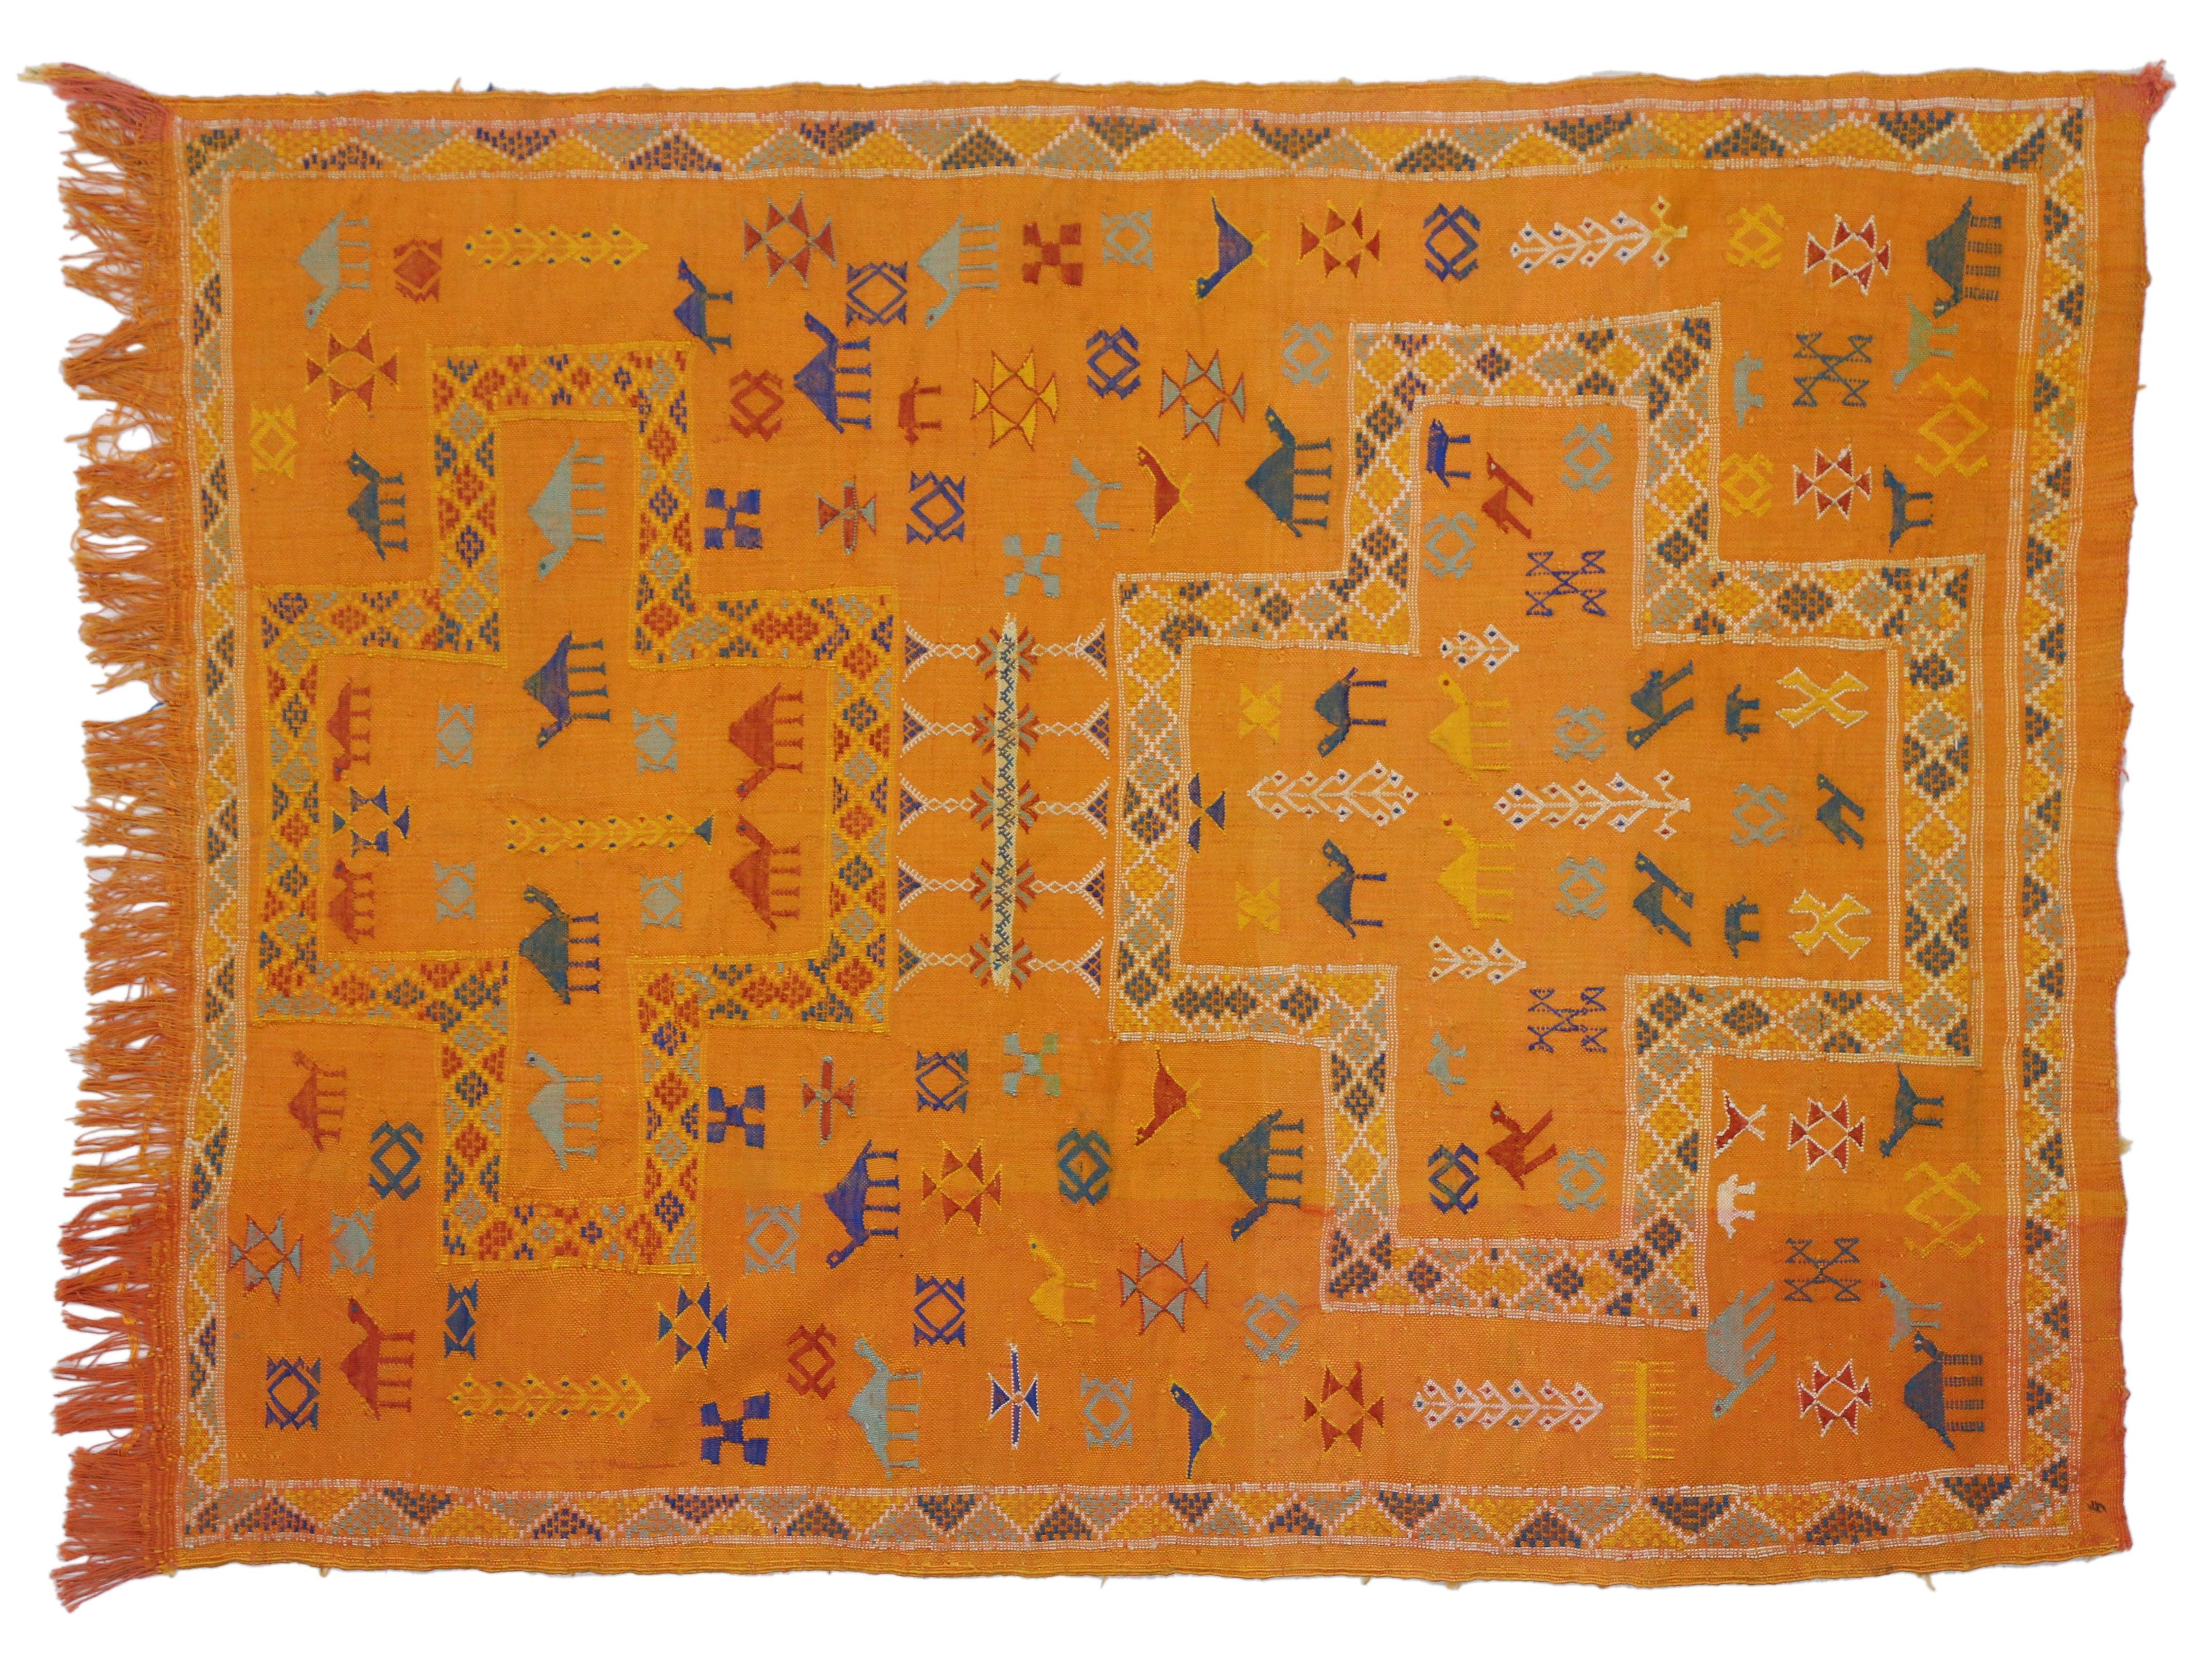 Hand-Woven Vintage Turkish Kilim Rug with Tribal Style, Small Flat-Weave Rug